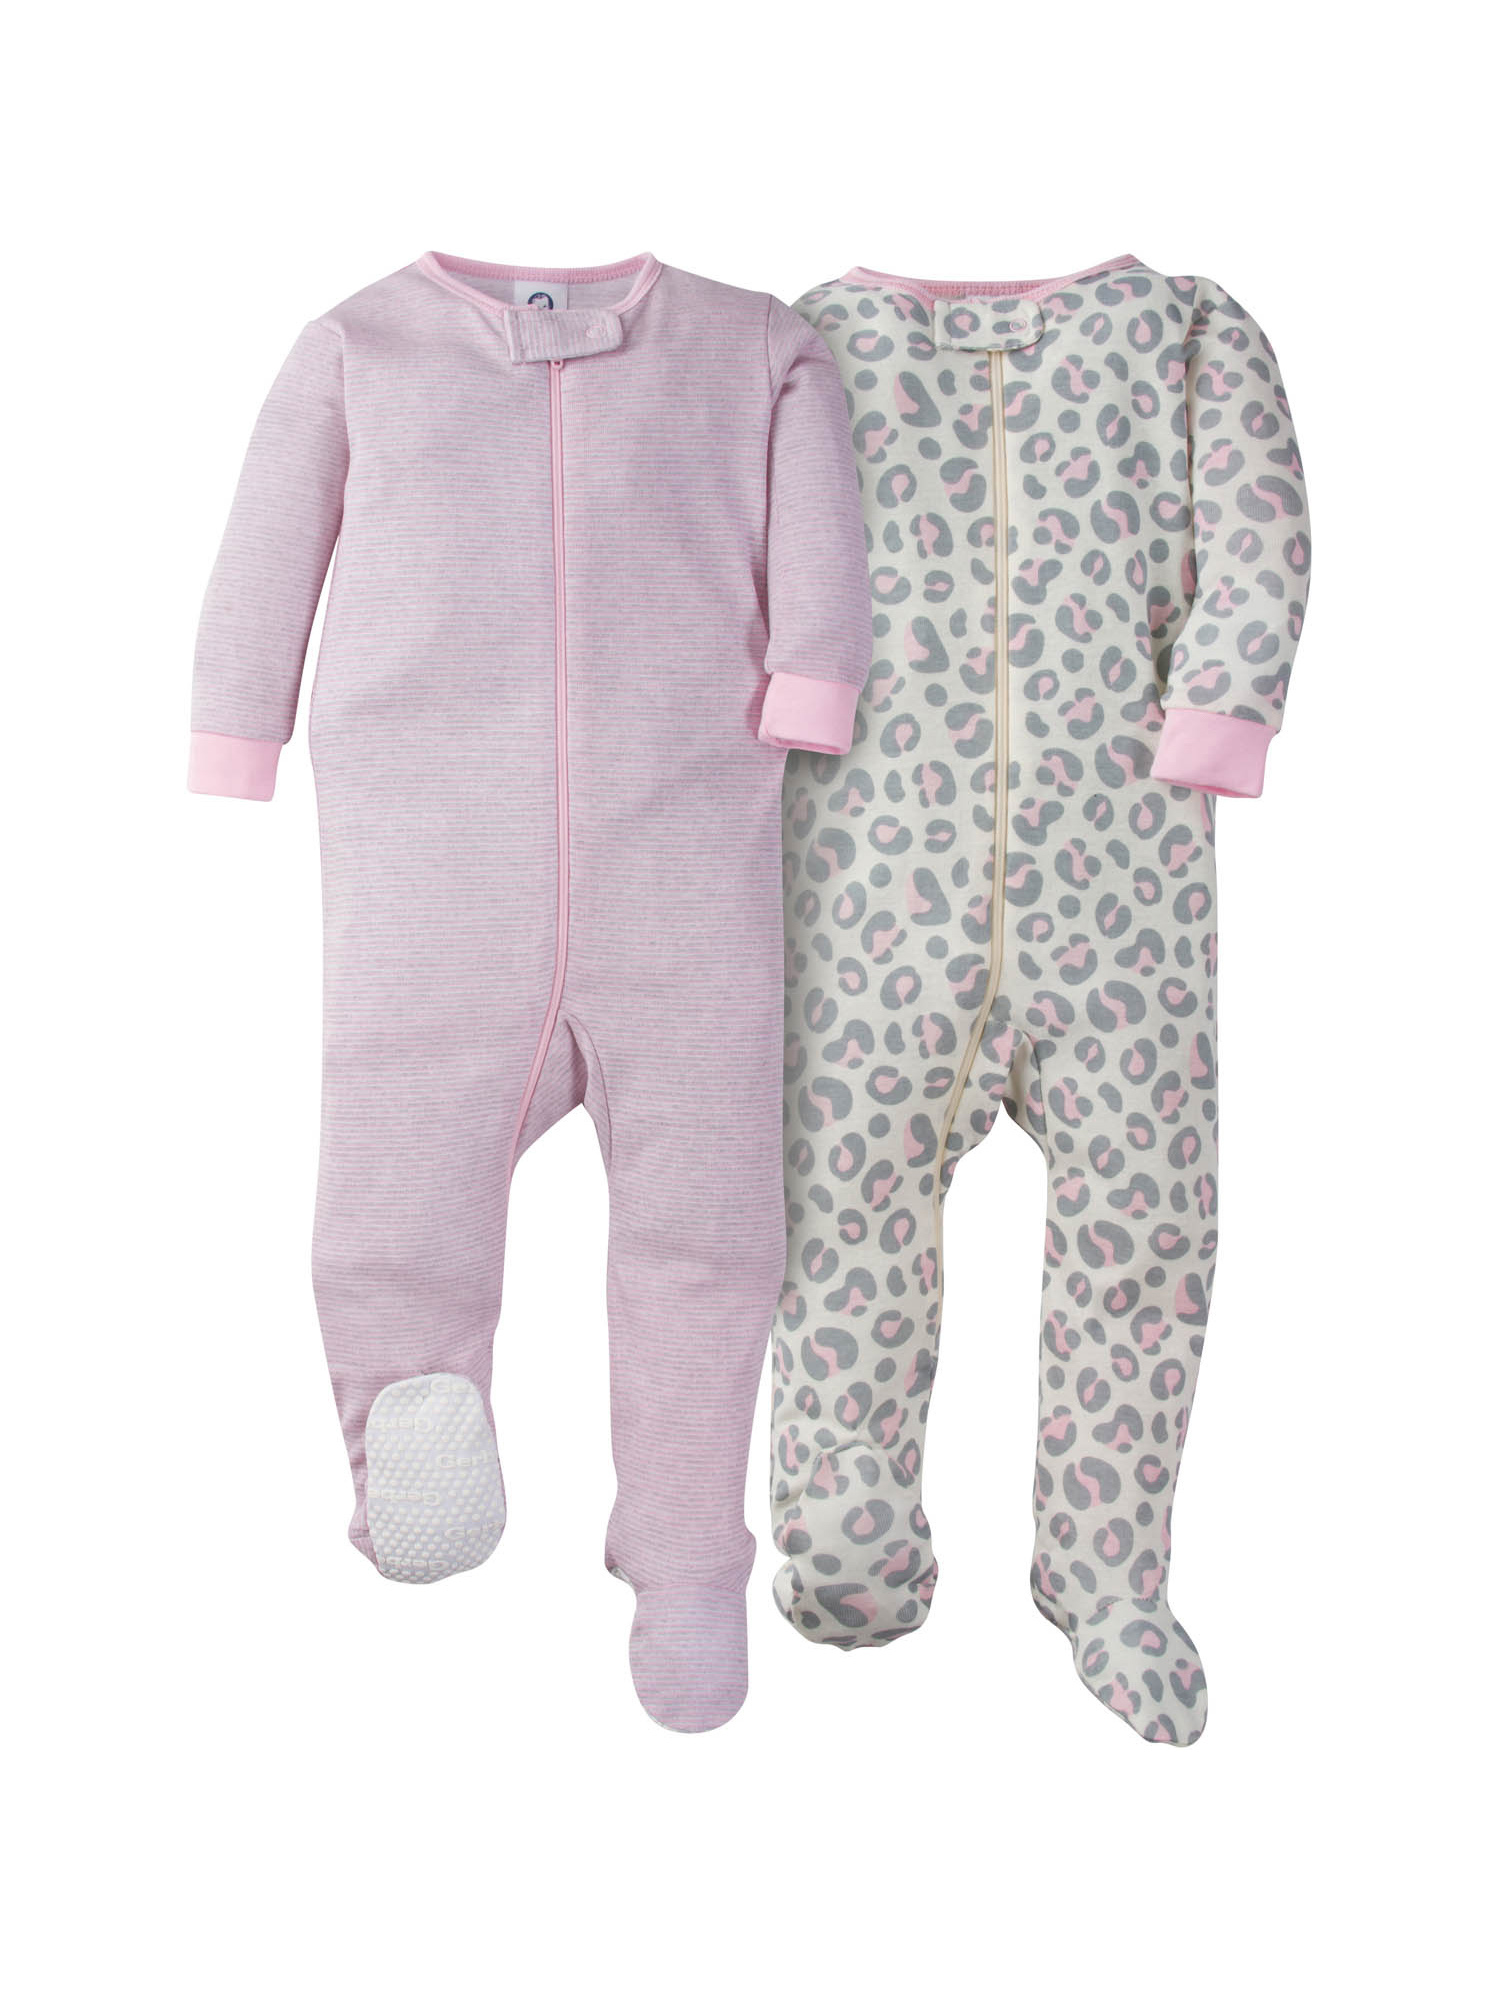 Gerber Baby-Girls 2-Pack Footed Unionsuit Sleepers